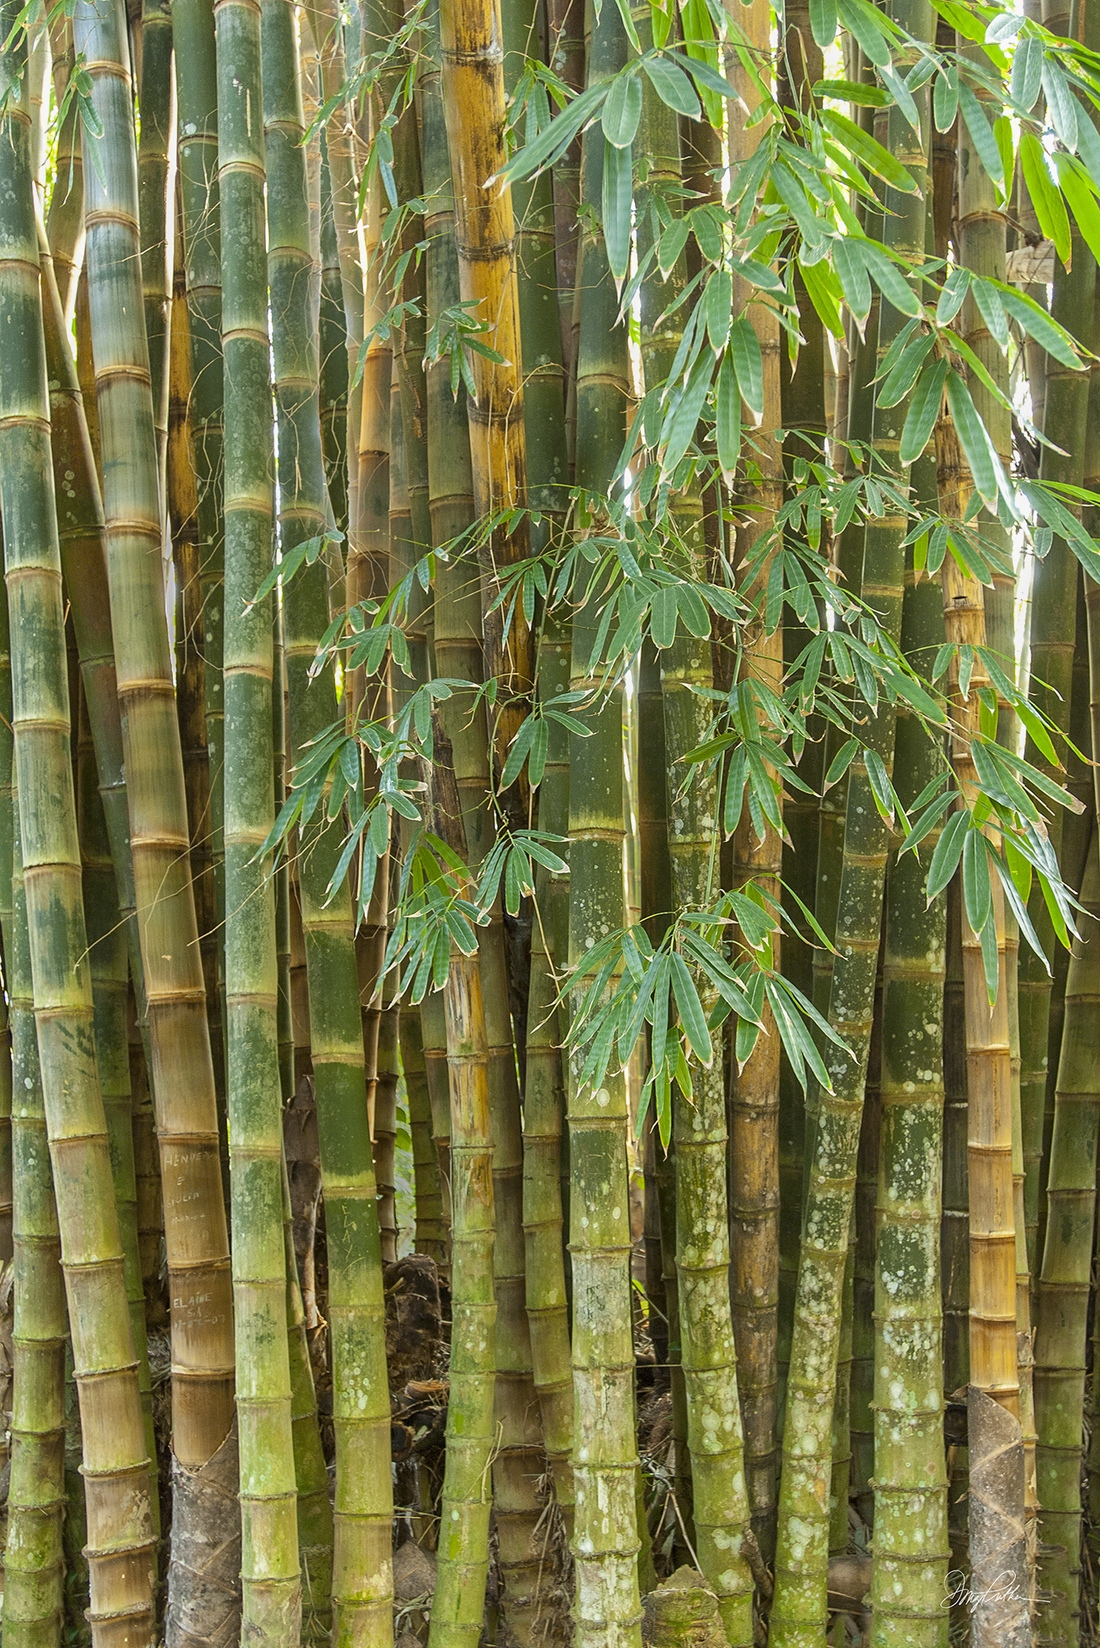 Bamboo Grove detail, by Doug Prather. A vertical detail image of a mature grove of bamboo trees. Rio de Janerio, Brazil